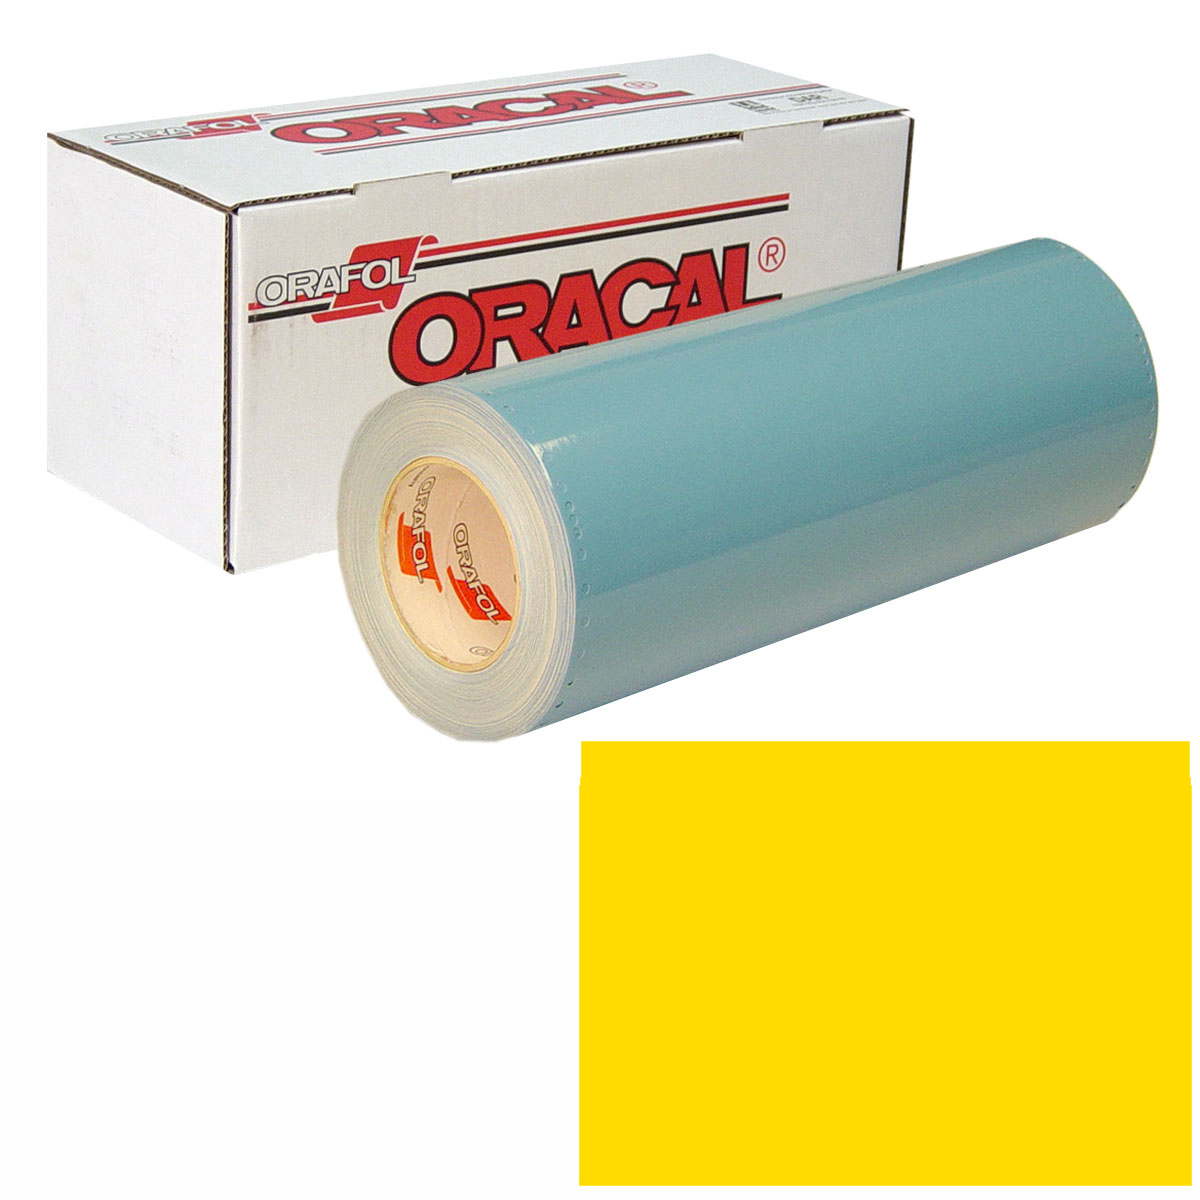 ORACAL 751 30in X 50yd 021 Yellow